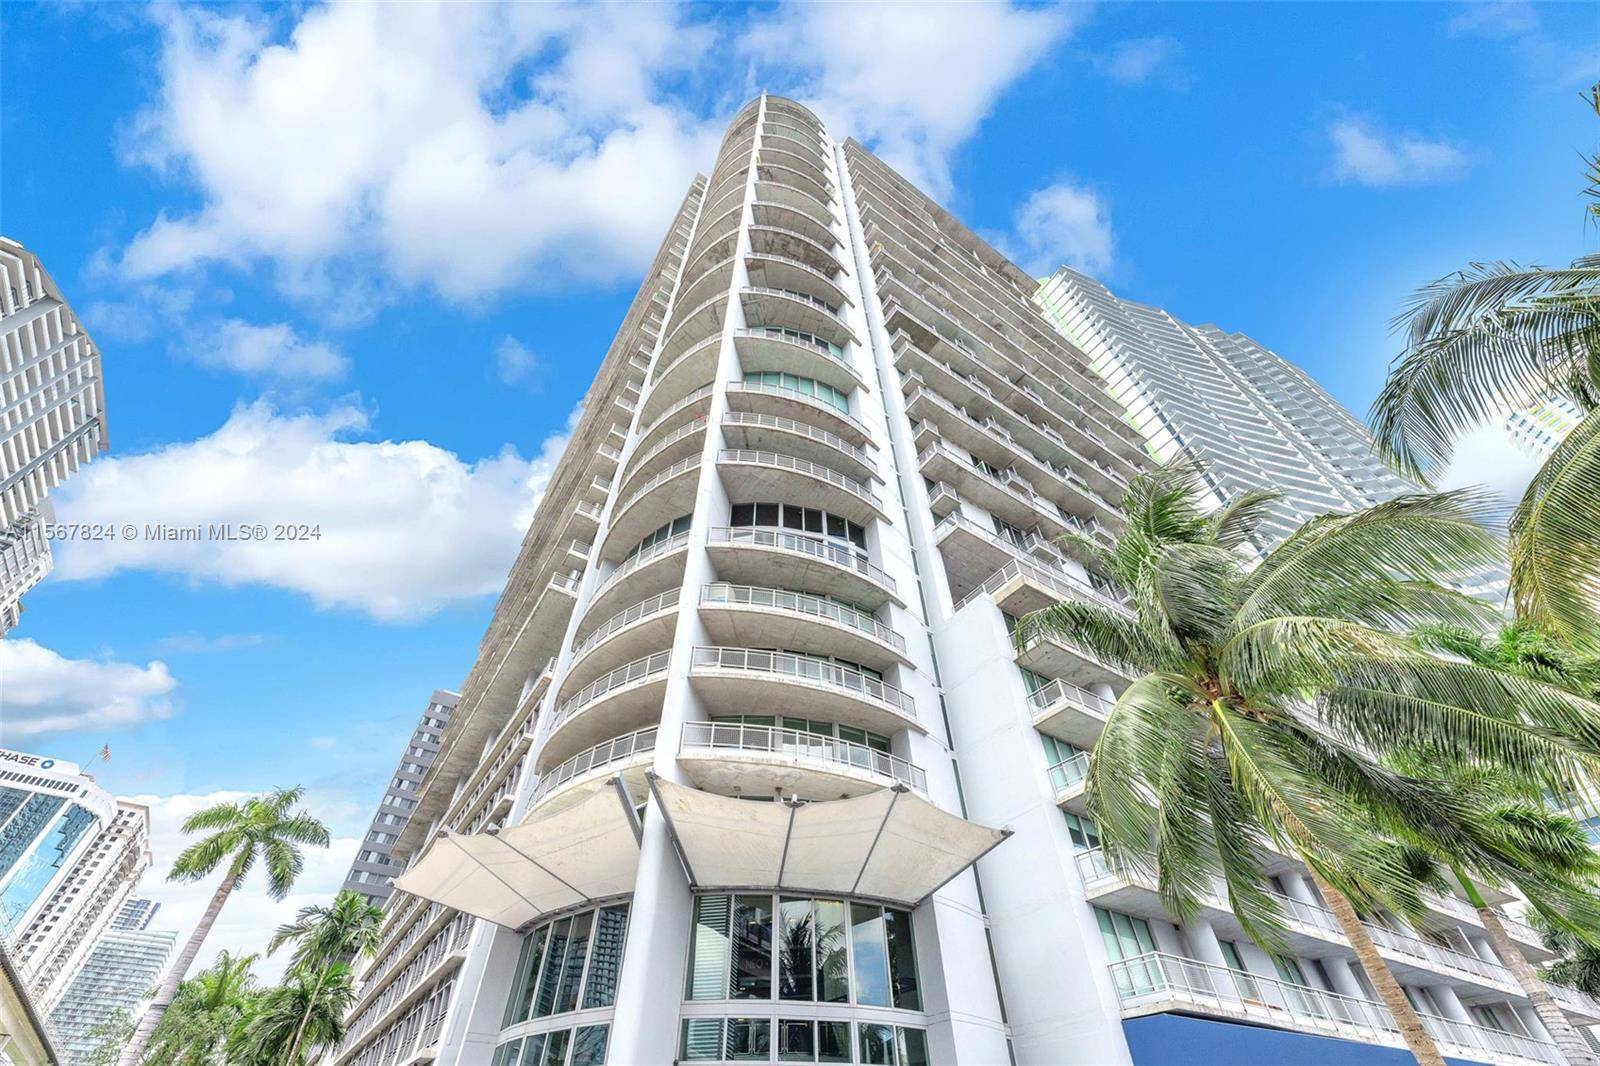 Loft style condo unit in the heart of Brickell with amazing views of the Brickell skyline and Miami River.